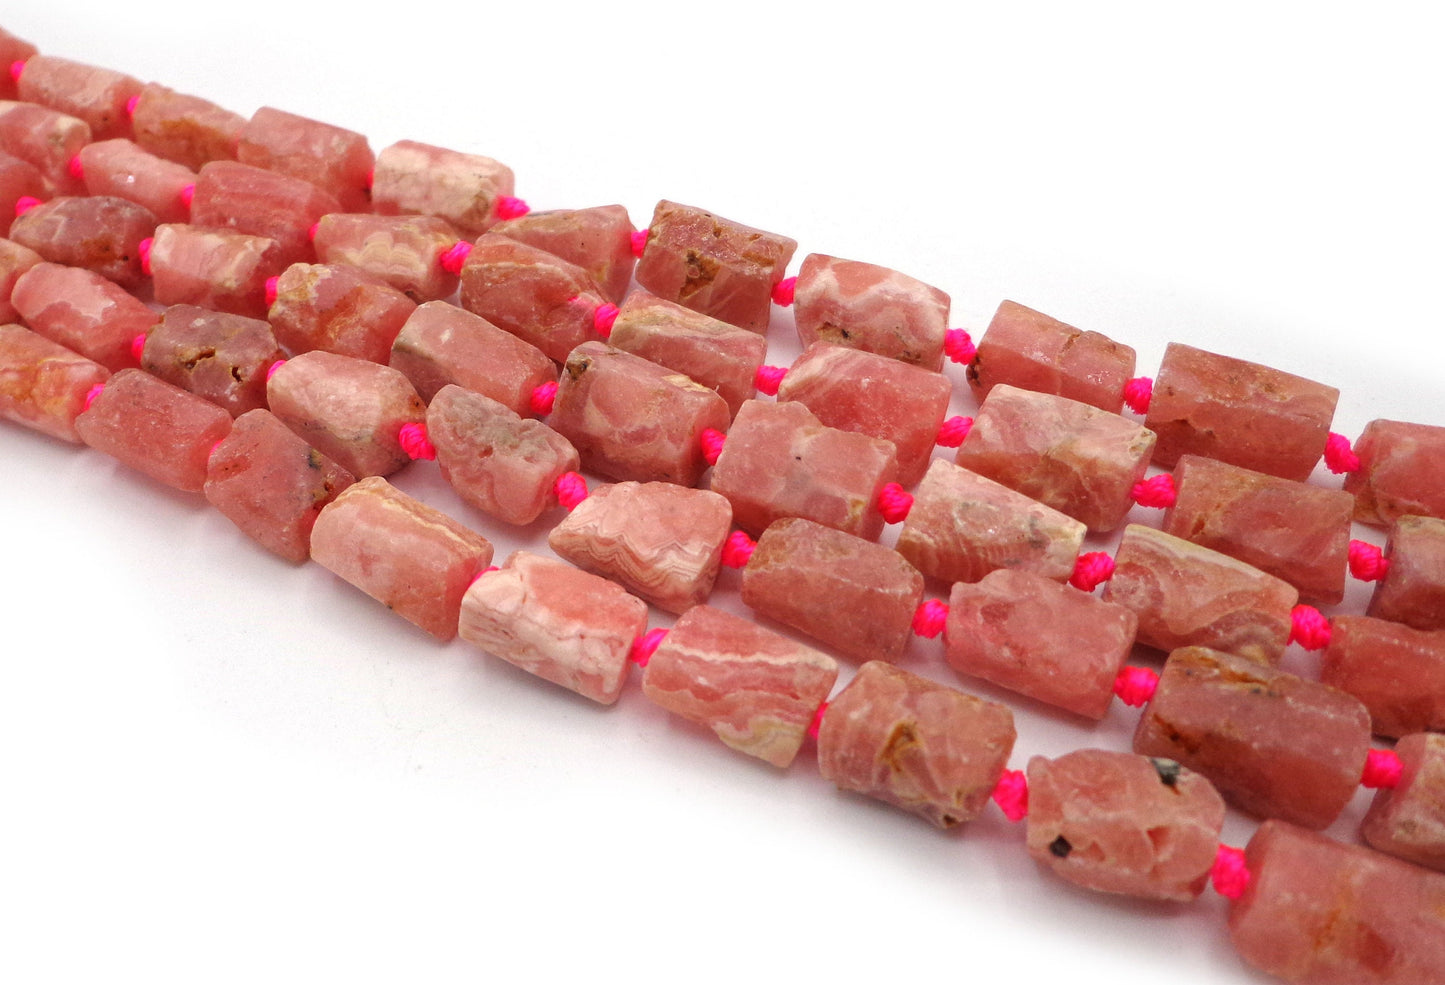 NATURAL Gemstone Rhodochrosite, Tube Shape 10x8mm, Full Strand 16" Great for making Jewelry! Not treated in anyway! AAA quality